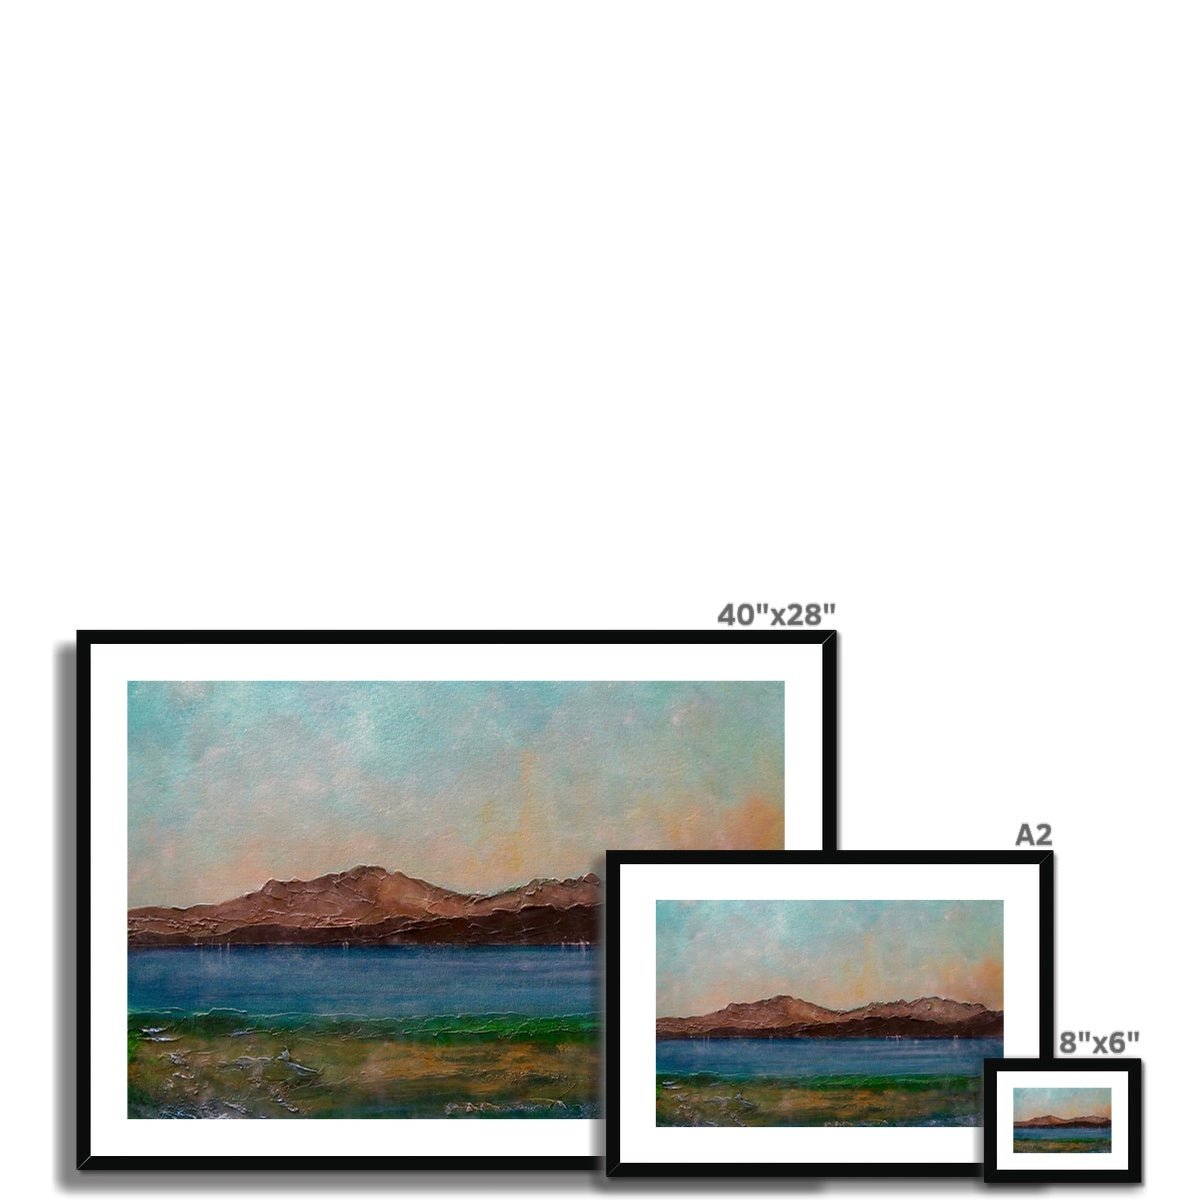 Arran From Scalpsie Bay Painting | Framed & Mounted Prints From Scotland-Framed & Mounted Prints-Arran Art Gallery-Paintings, Prints, Homeware, Art Gifts From Scotland By Scottish Artist Kevin Hunter